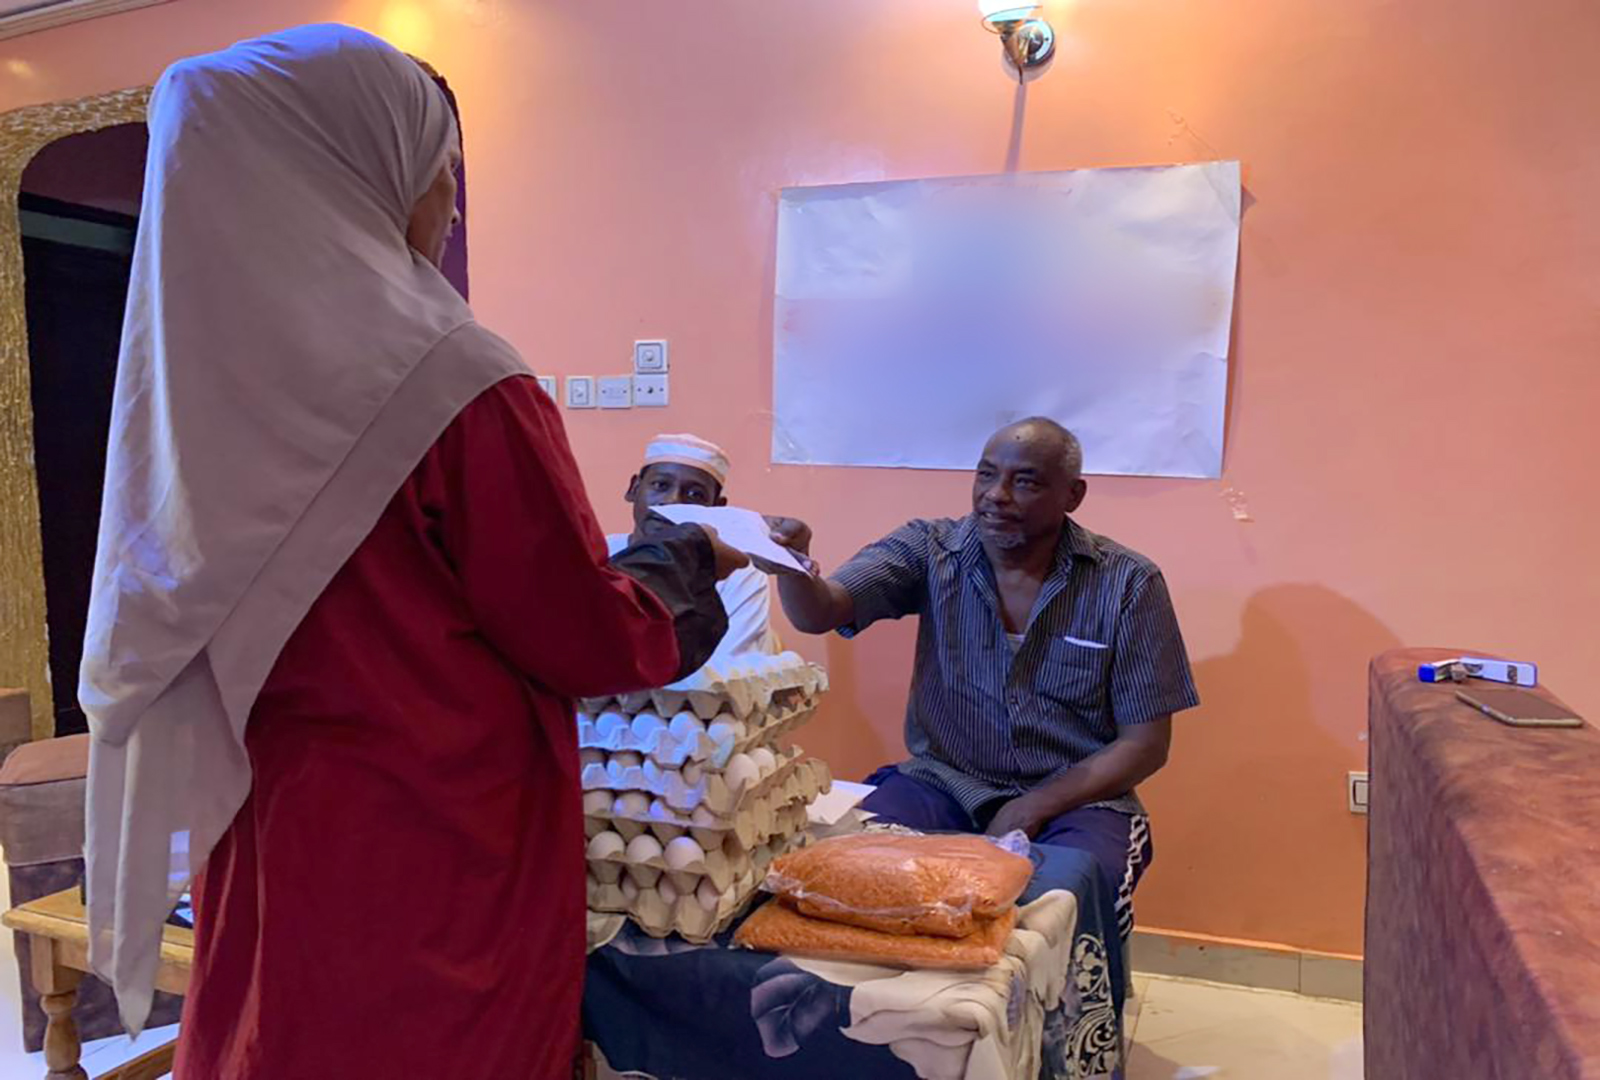 A member of NIDAA's staff supplies a woman with a nutritional voucher at a Women's Response Room in Khartoum.